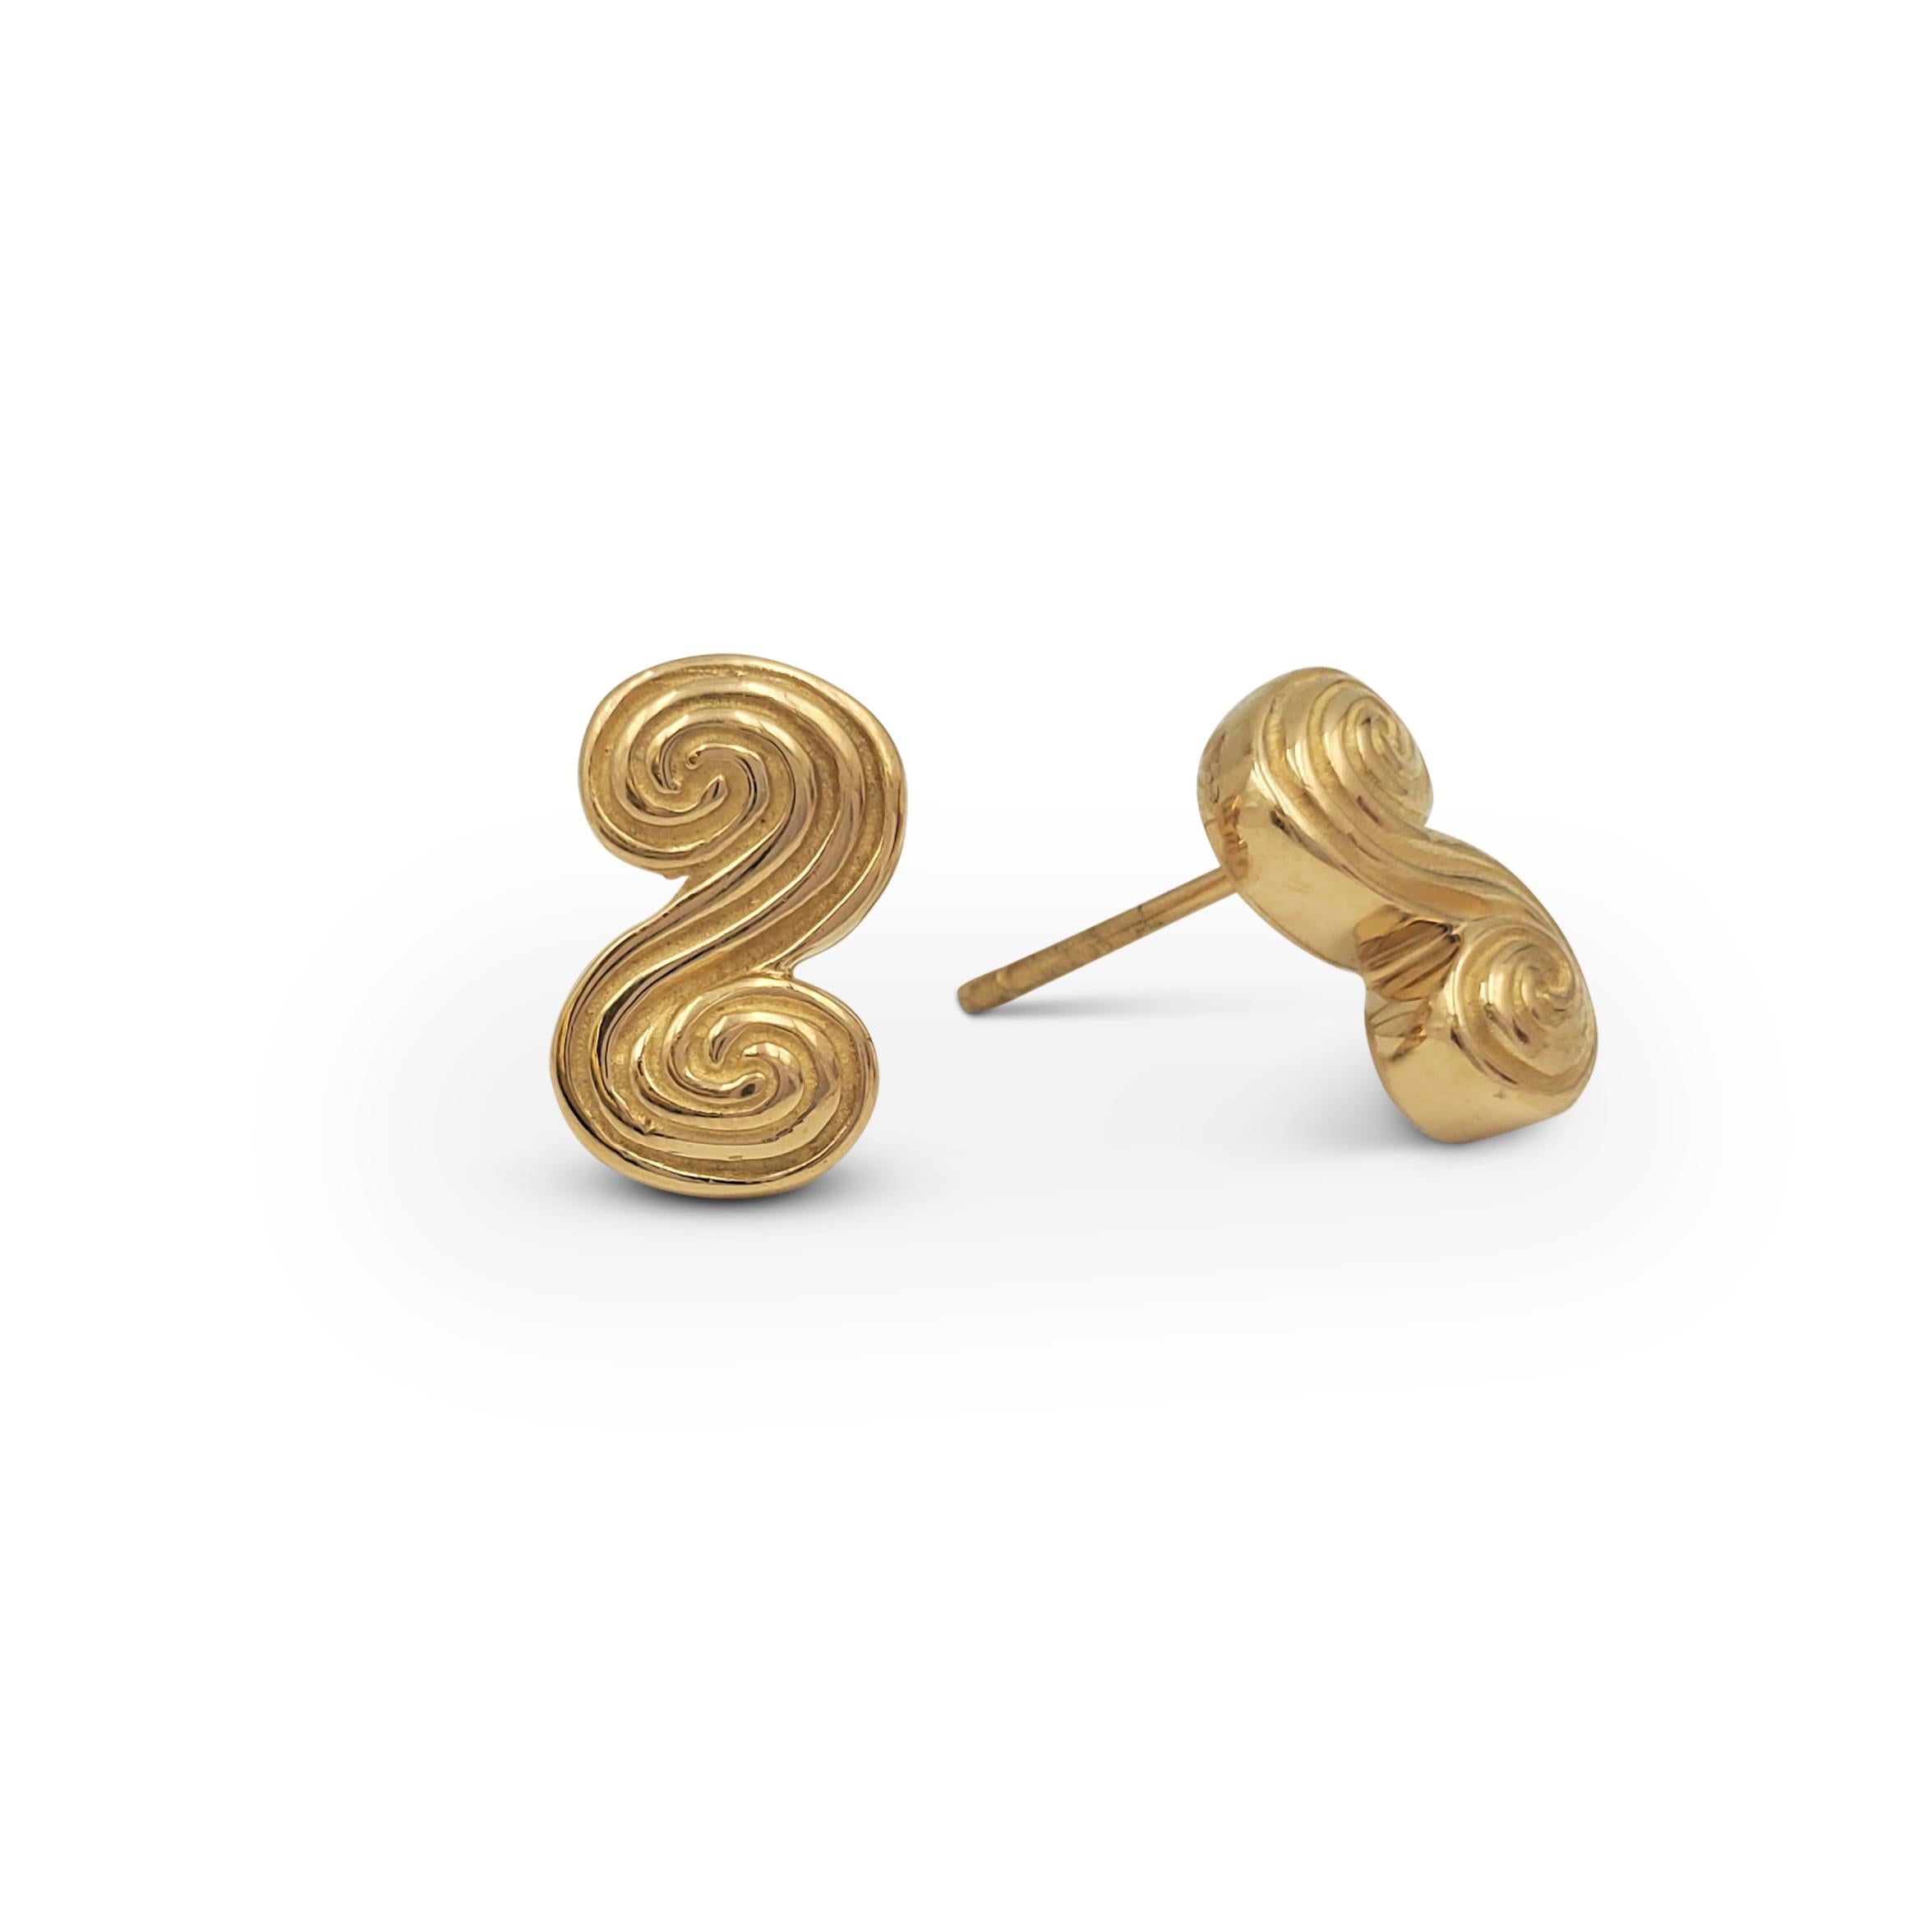 Authentic Tiffany & Co. 'Sprio' swirl earrings crafted in 18 karat yellow gold. Signed T&Co., 750. The earrings are not presented with the original box or papers. CIRCA 1990s.

Box: No
Papers: No